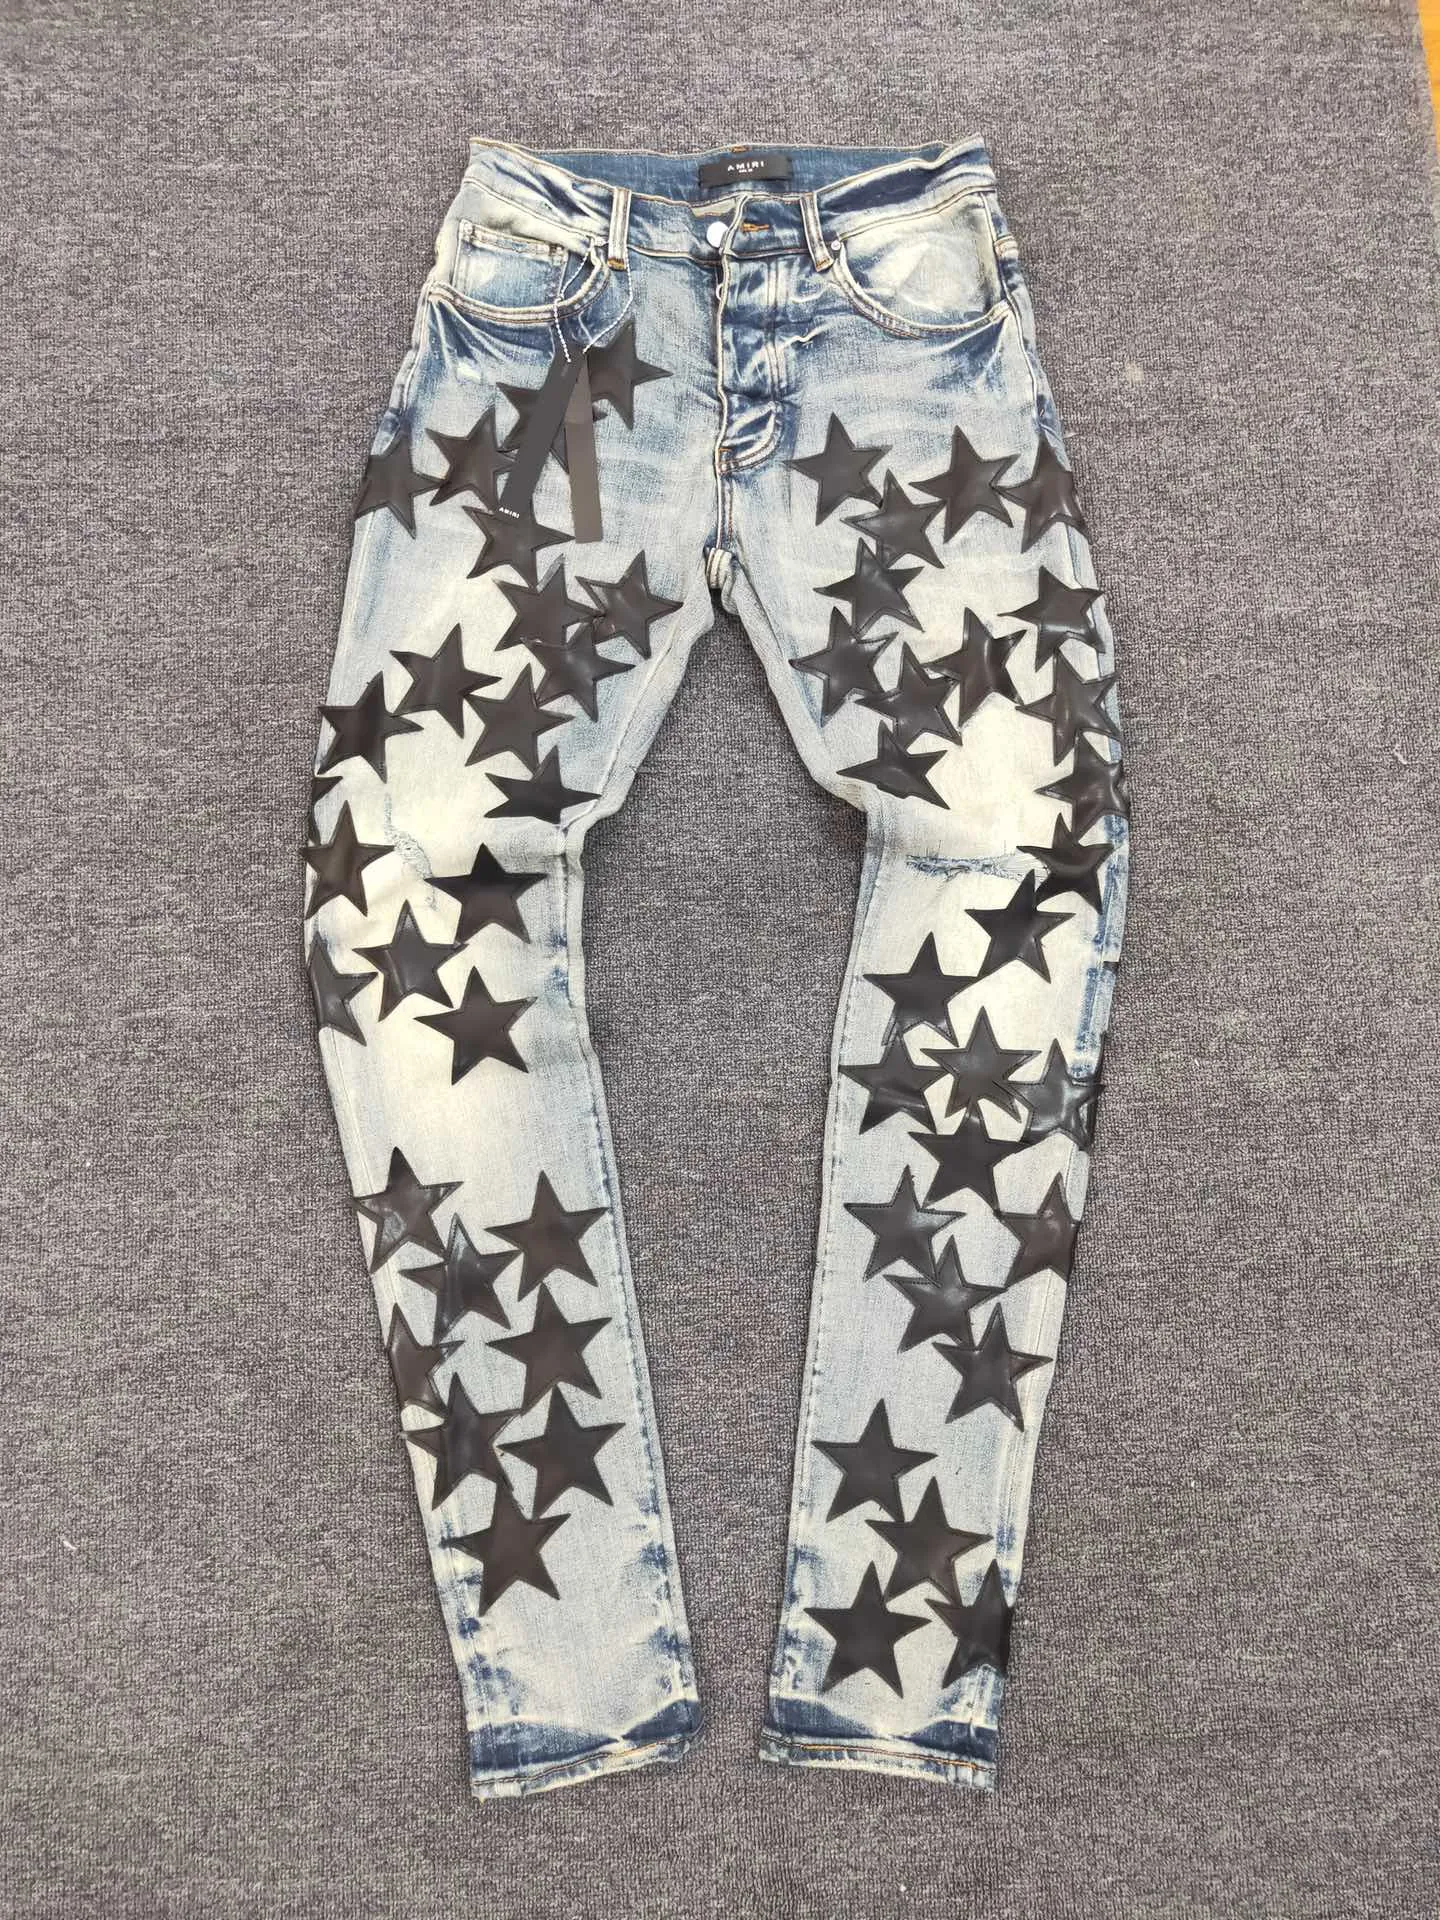 FALECTION MENS 21SS AMIMIKE JEANS DISTRESSED LEATHER STARS PATCH RIPPED DENIM jeans231g